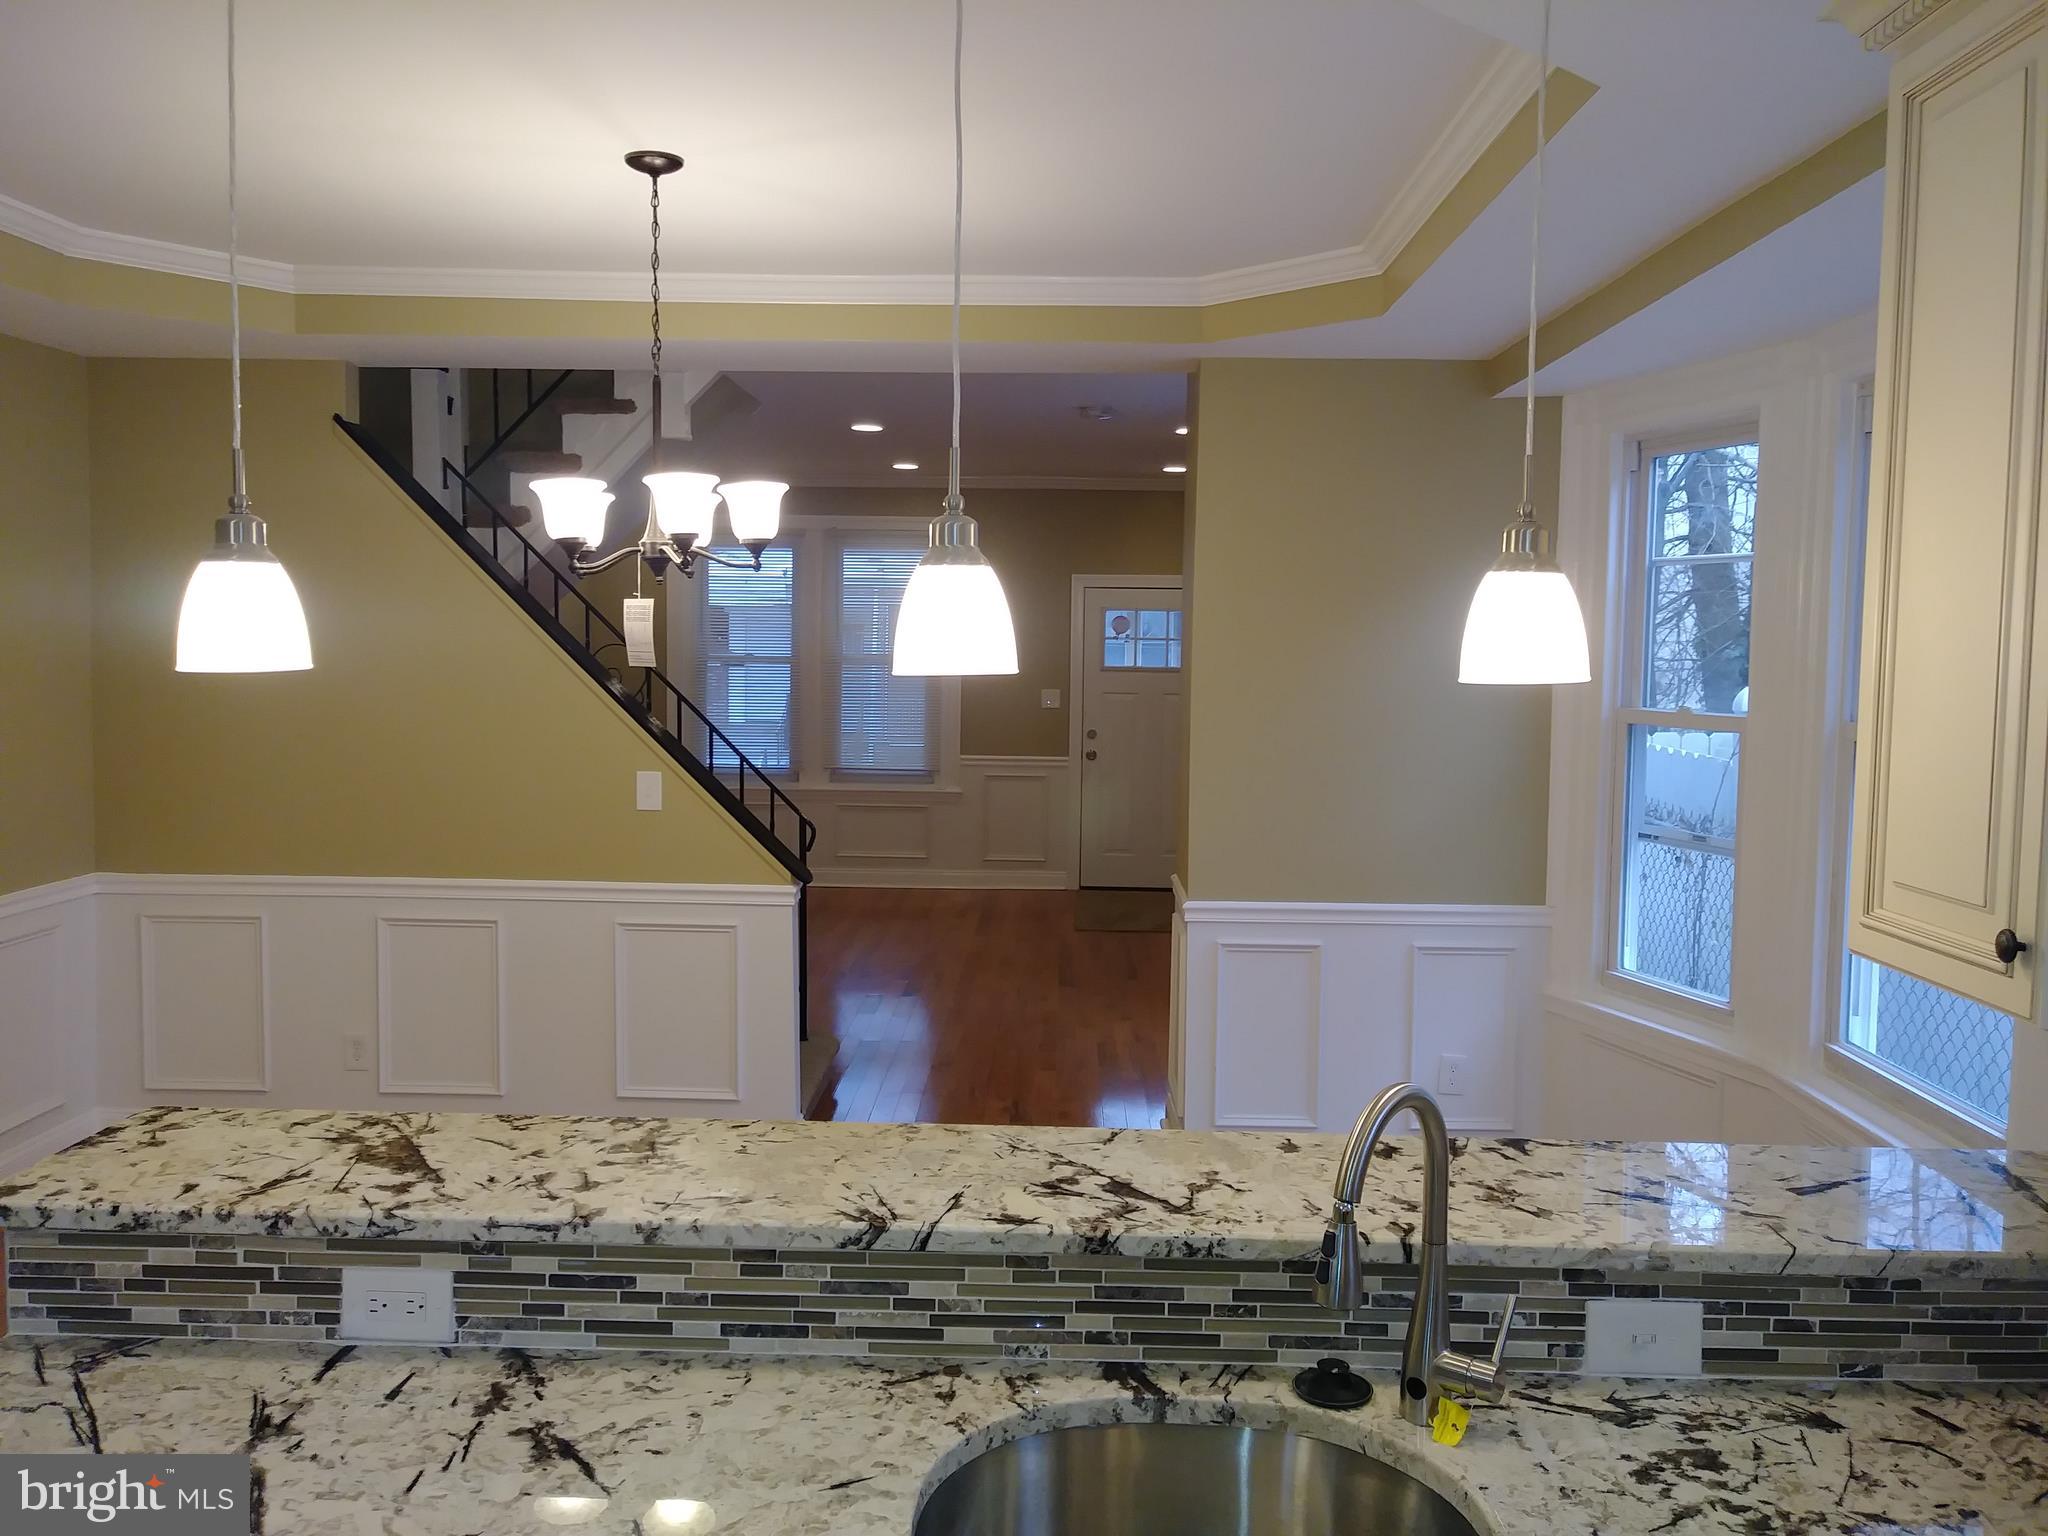 a kitchen with a sink and chandelier